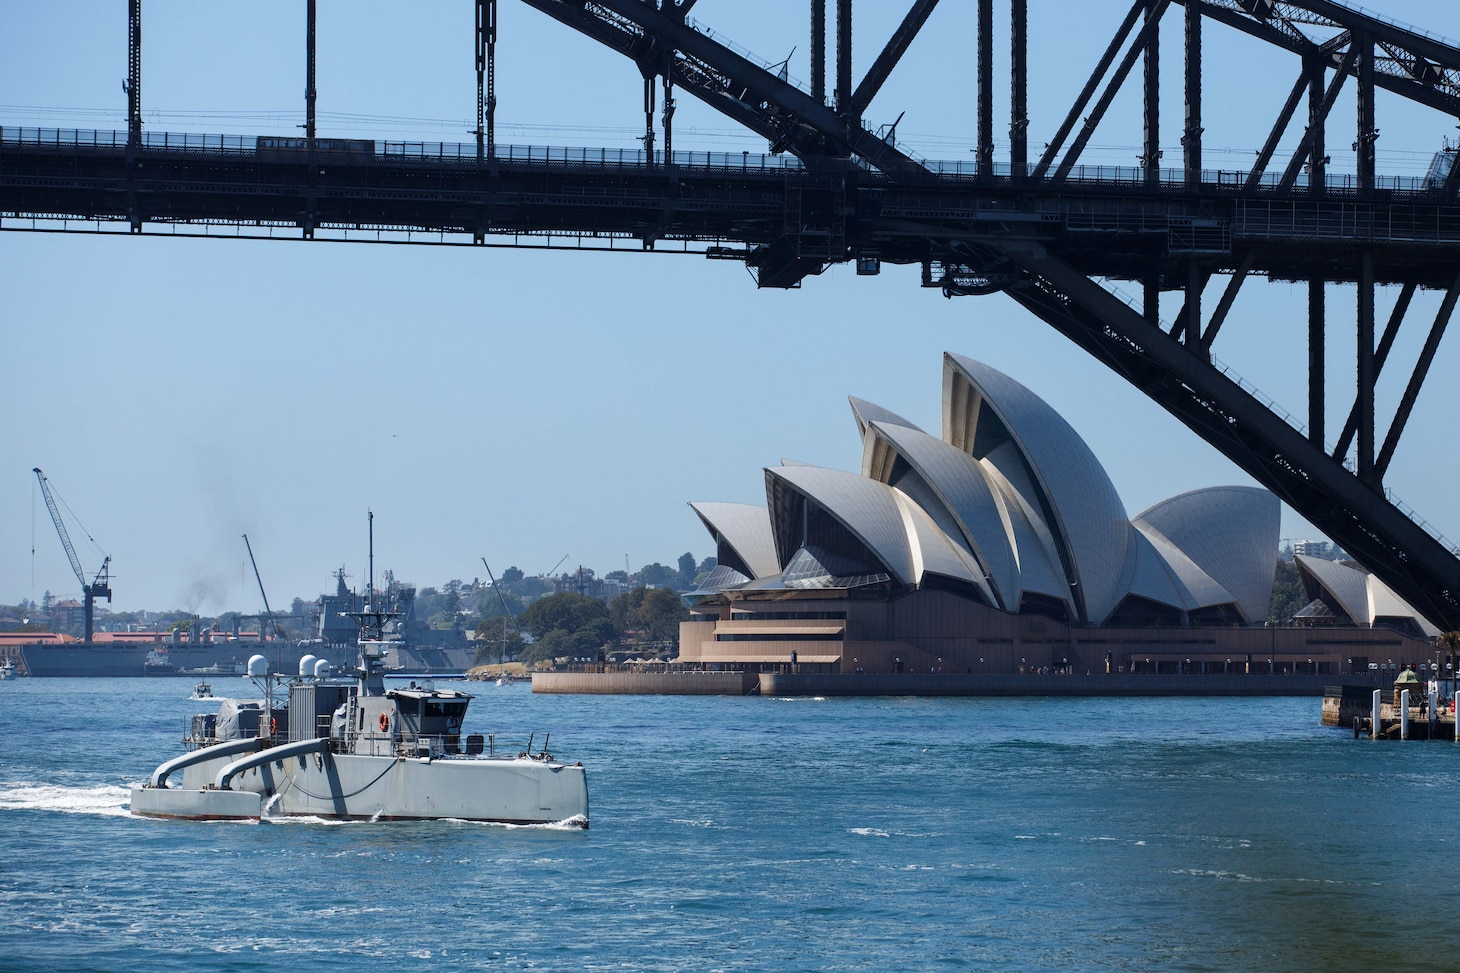 The unmanned surface vessel Sea Hunter transits underneath the Sydney Harbor bridge as part of a scheduled port visit during Integrated Battle Problem (IBP) 23.2, Oct 24, 2023. IBP 23.2 is a Pacific Fleet exercise to test, develop and evaluate the integration of unmanned platforms into fleet operations to create warfighting advantages. (U.S. Navy photo by Ensign Pierson Hawkins)